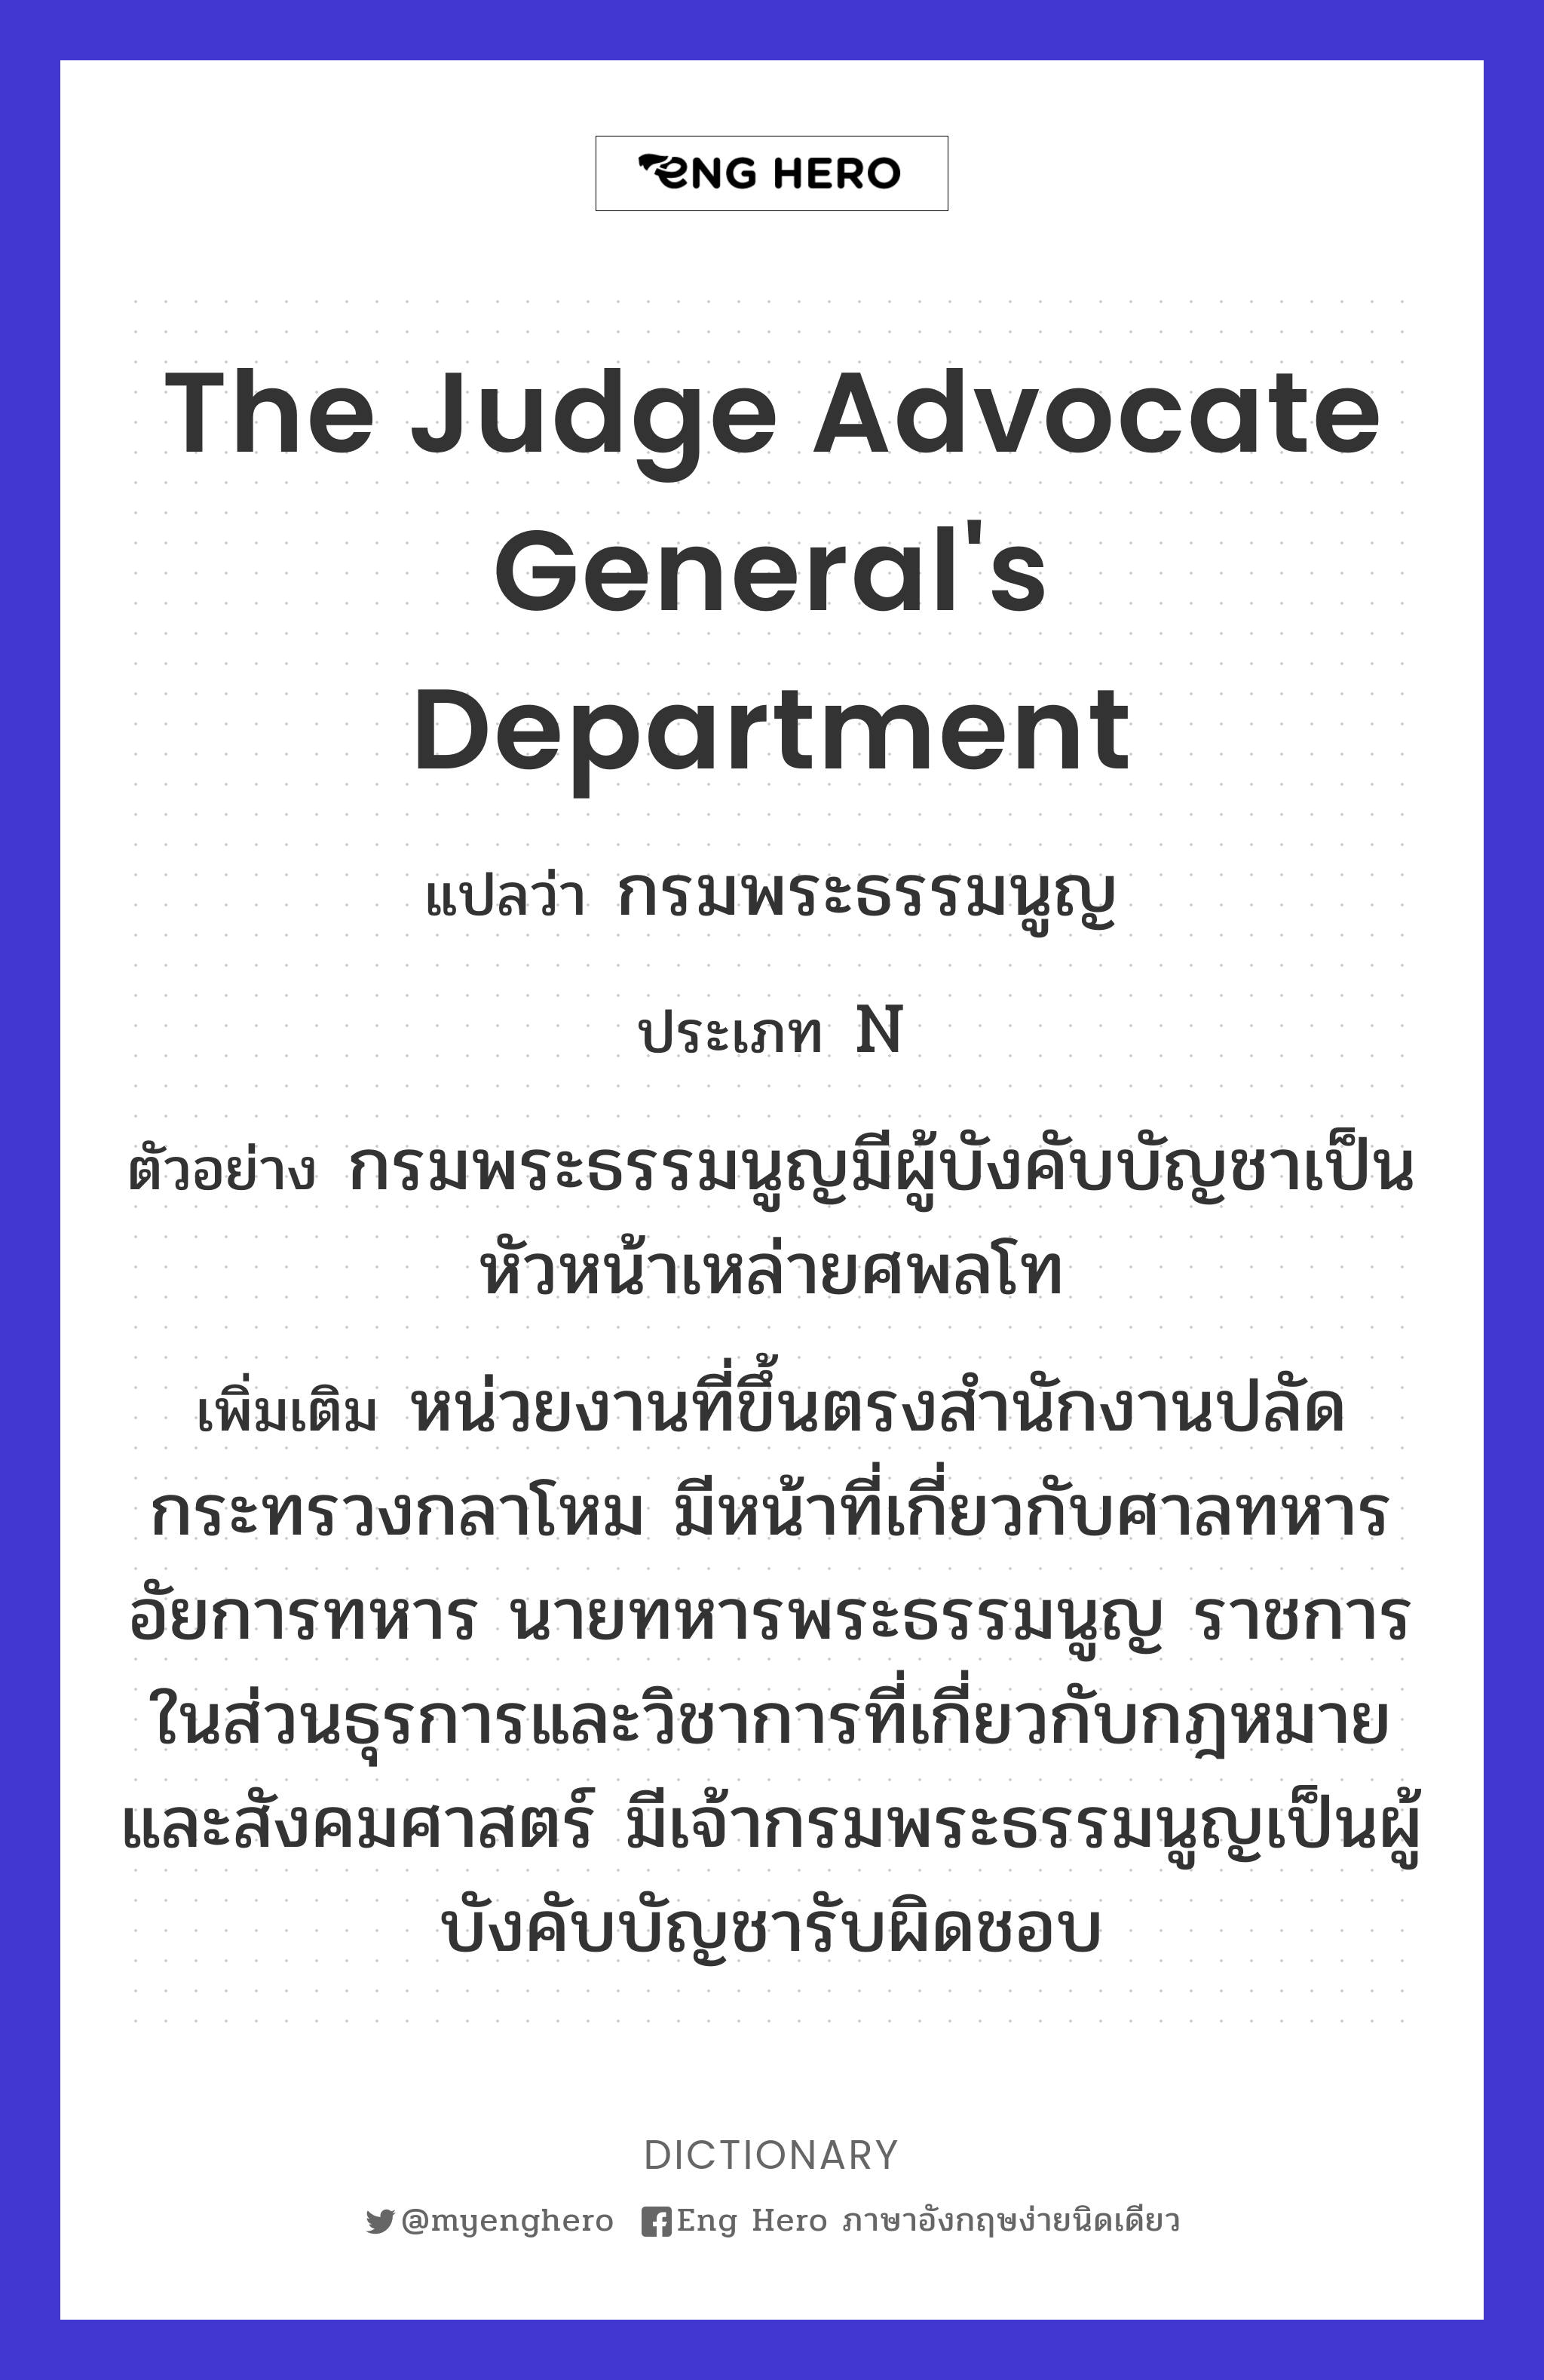 The Judge Advocate General's Department